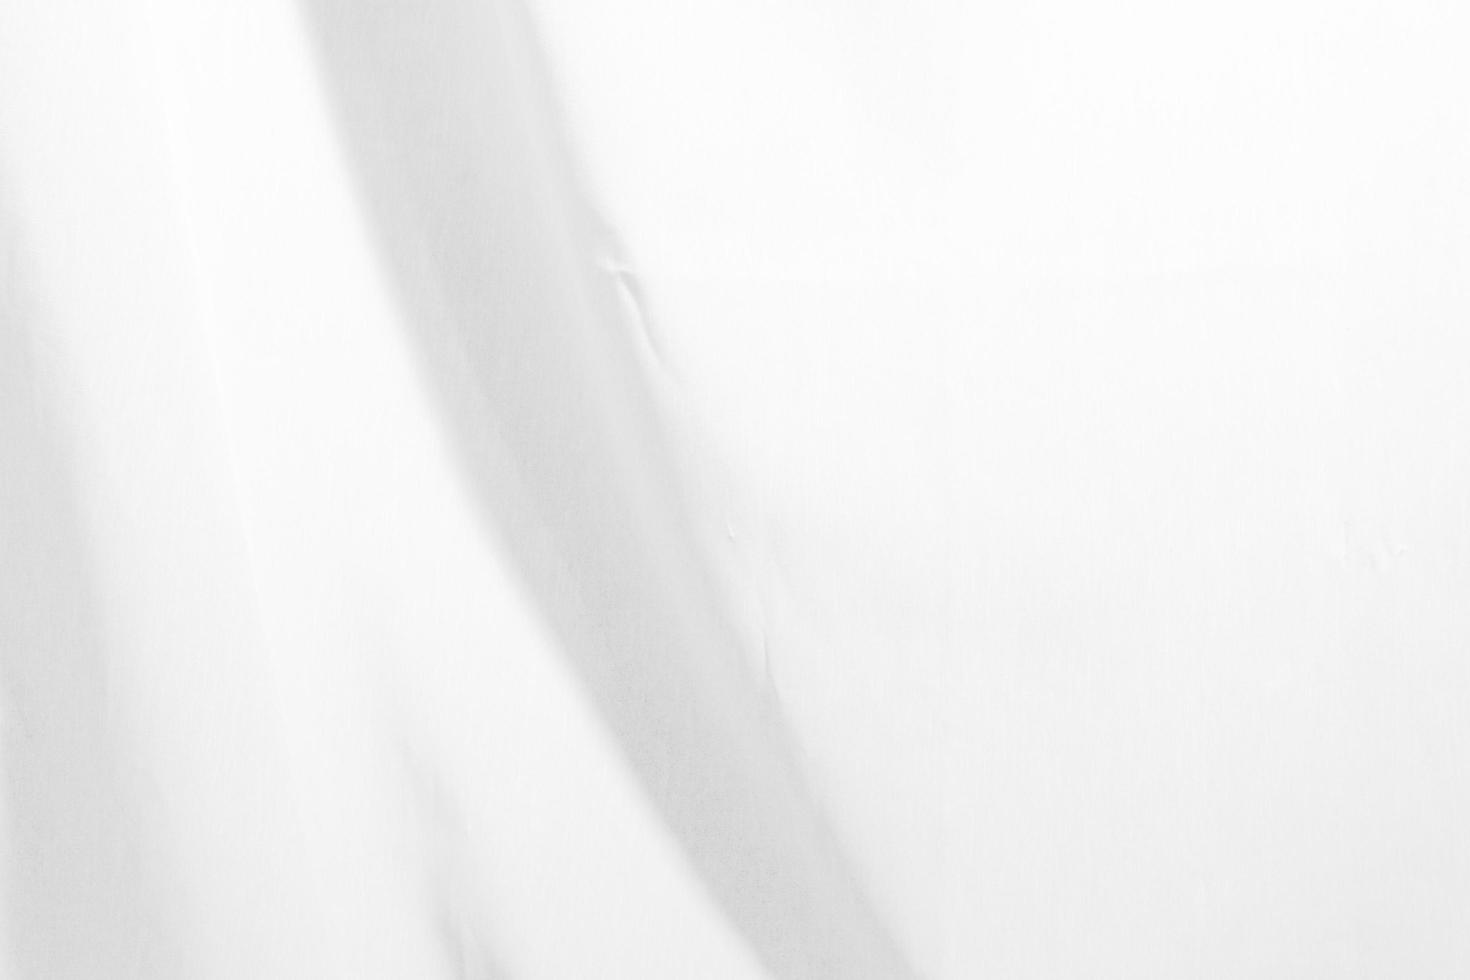 Abstract white cloth background photo